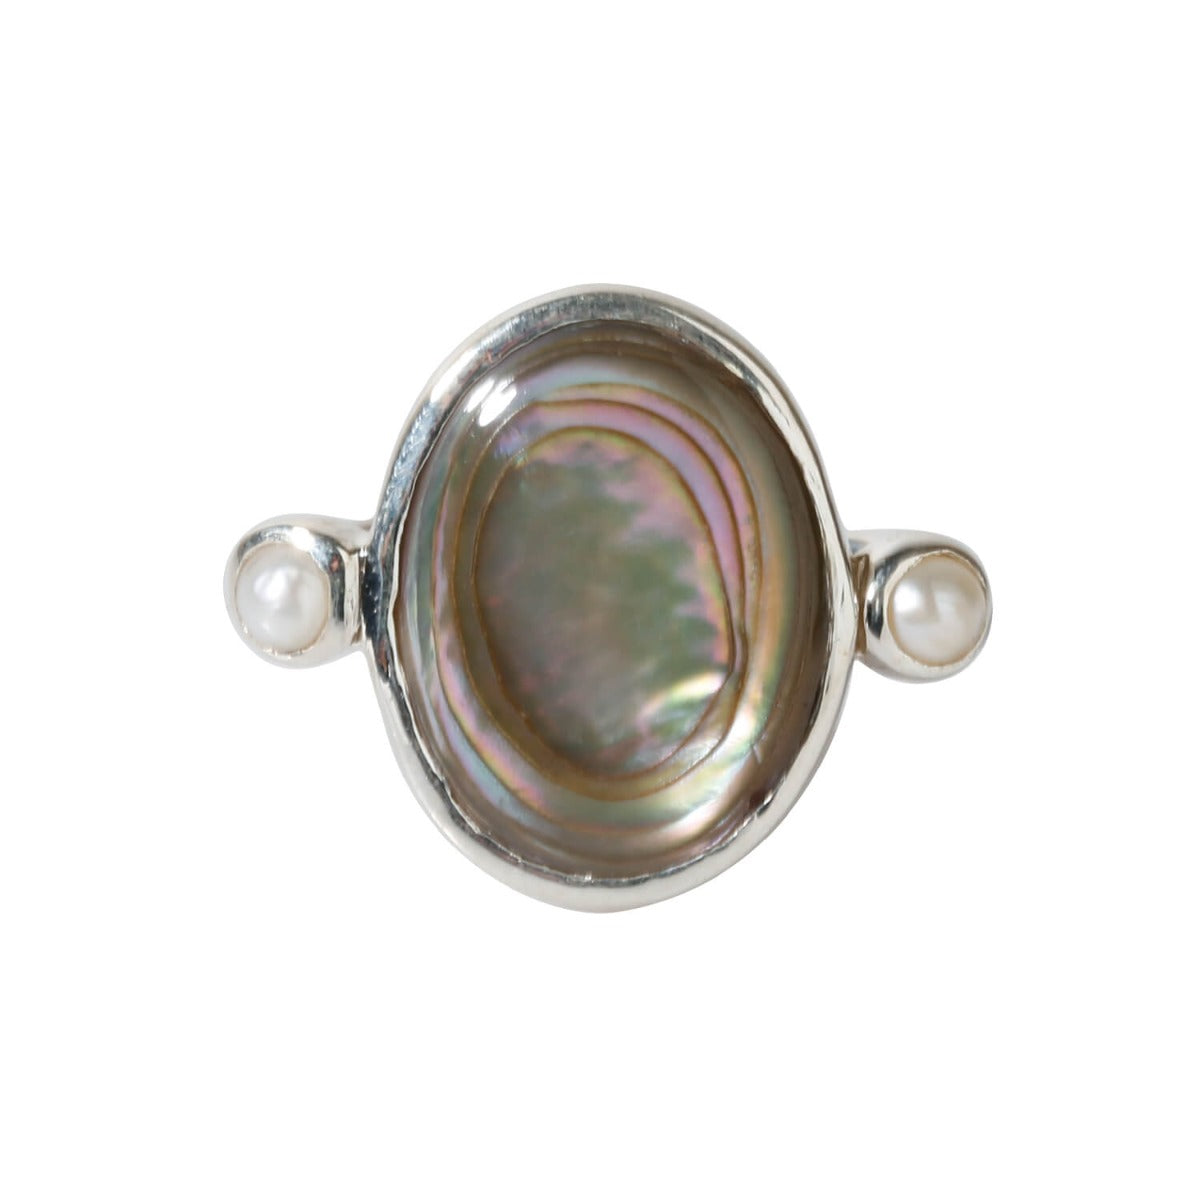 Bezel set abalone & pearl silver ring